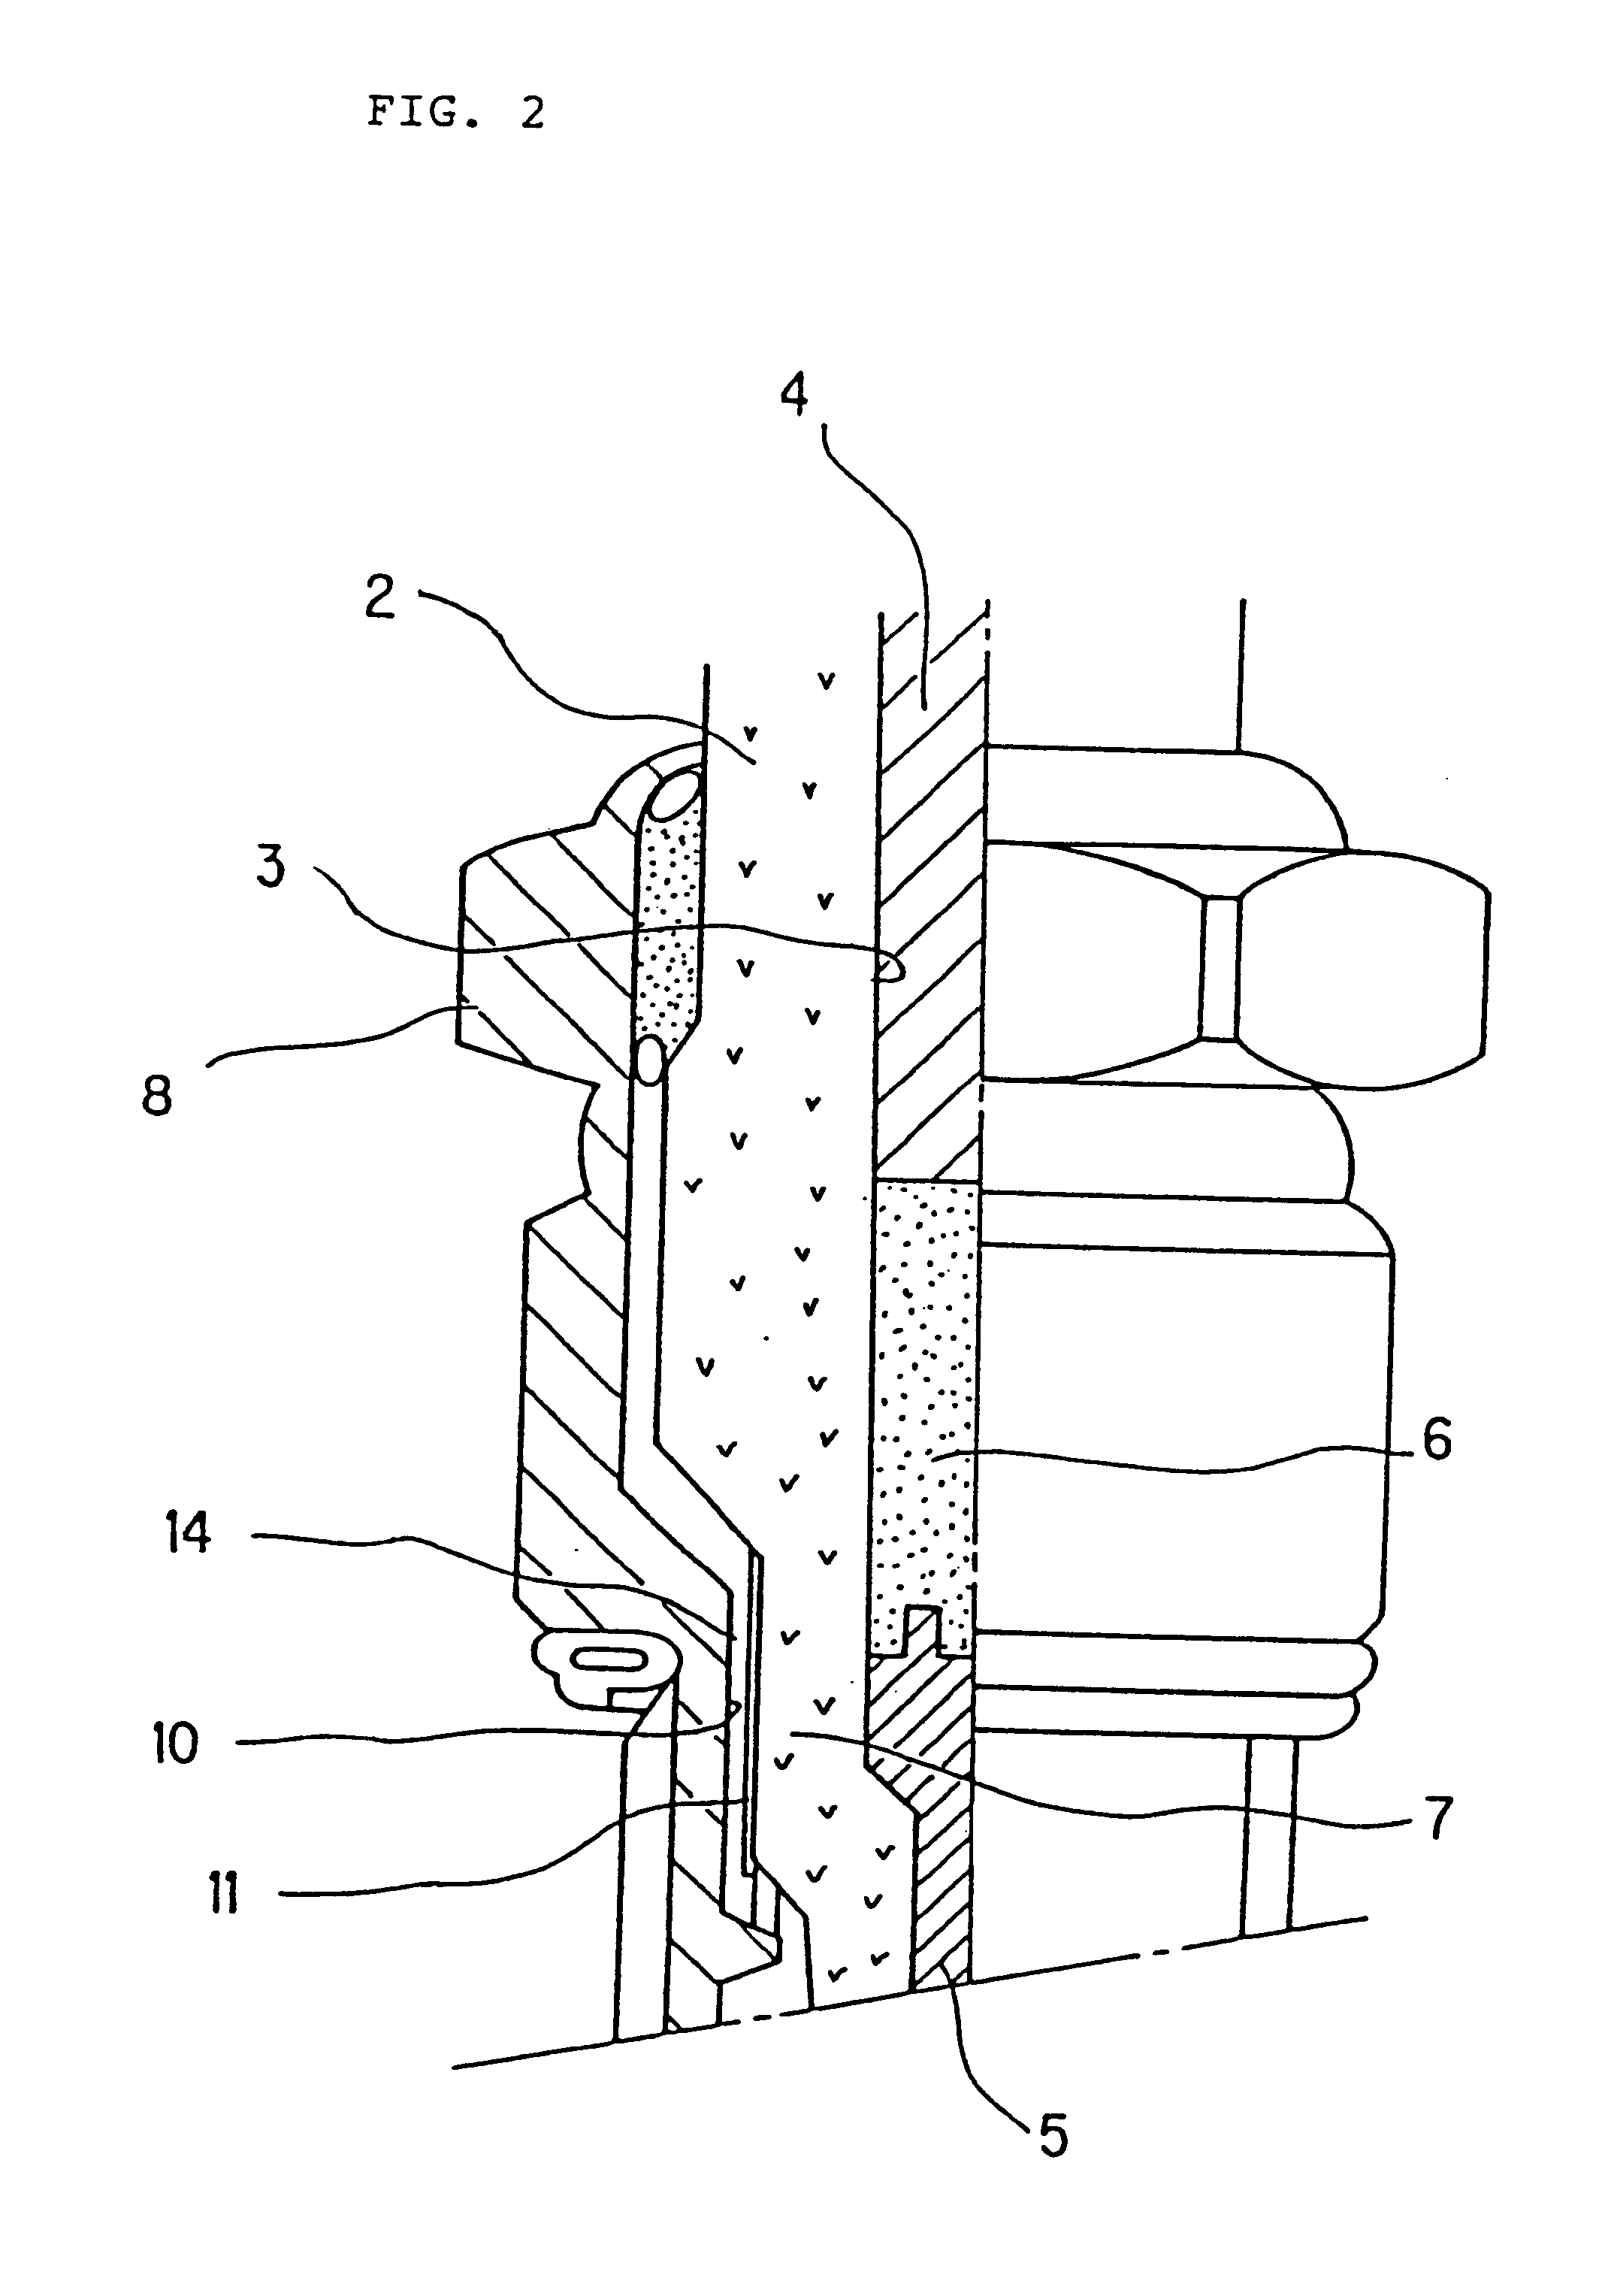 Spark plug having an oil film on an intermediate portion of the insulator or intermediate portion of the metallic shell